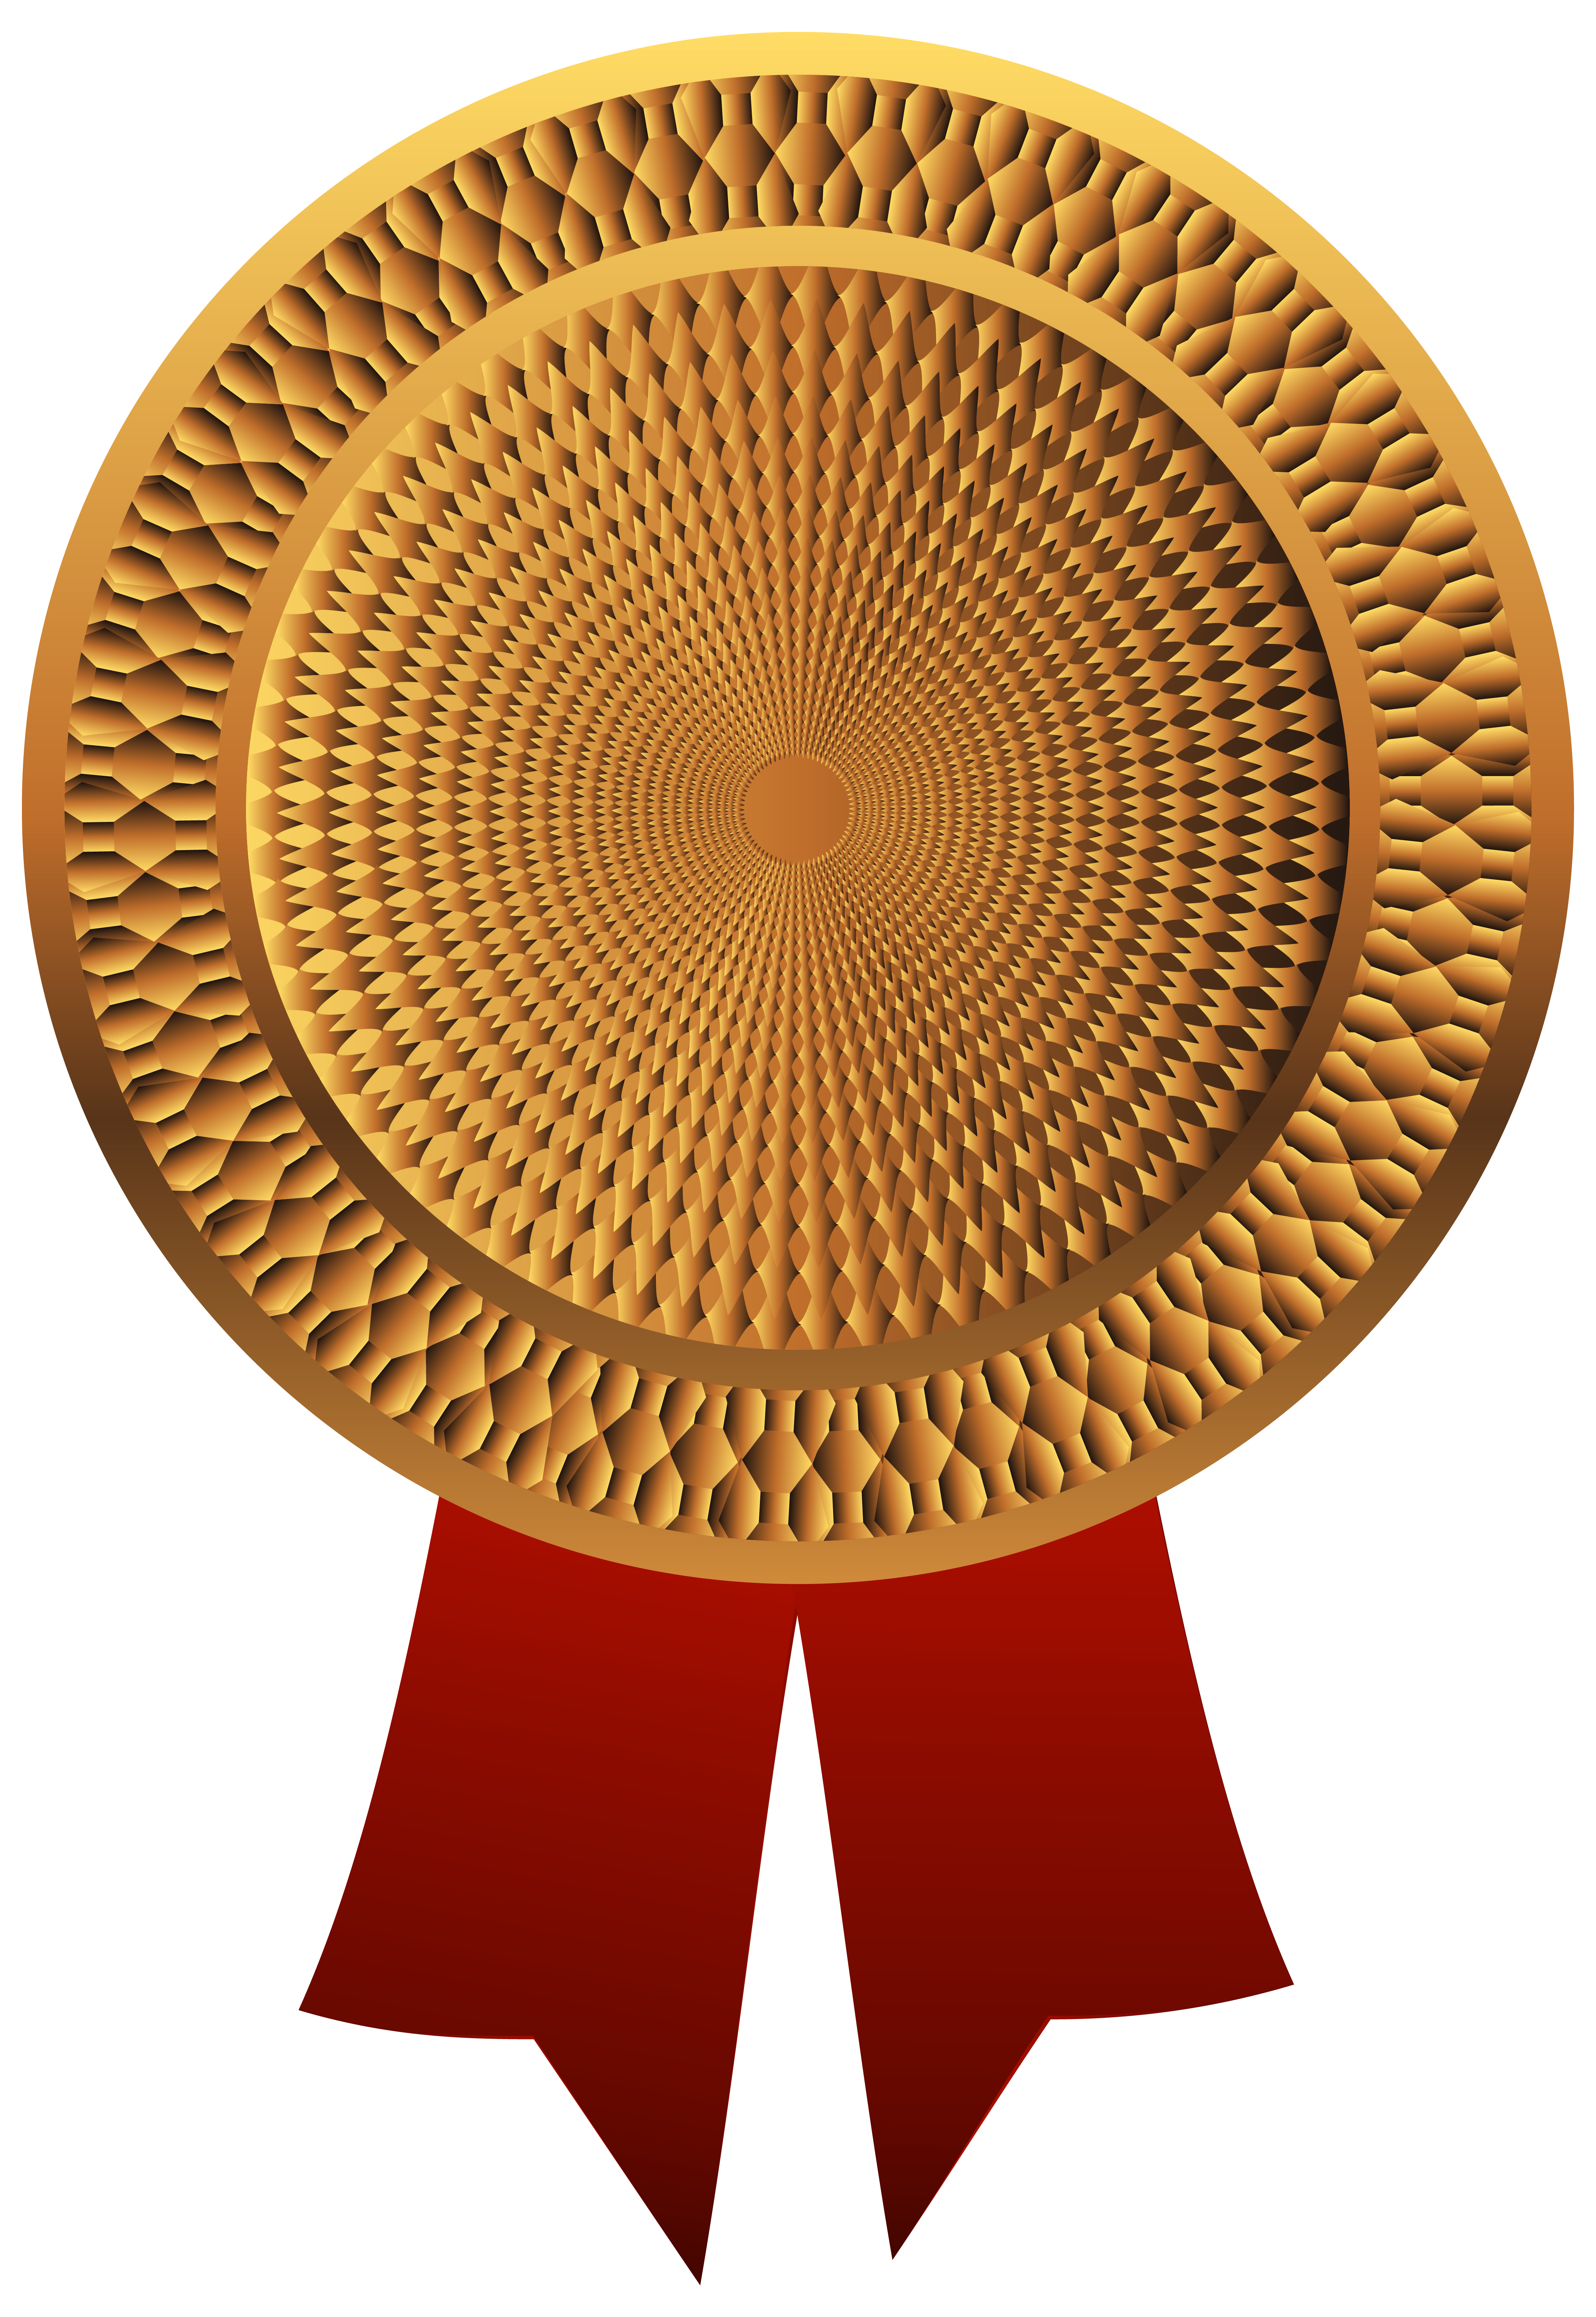 Png image gallery yopriceville. Medal clipart bronze